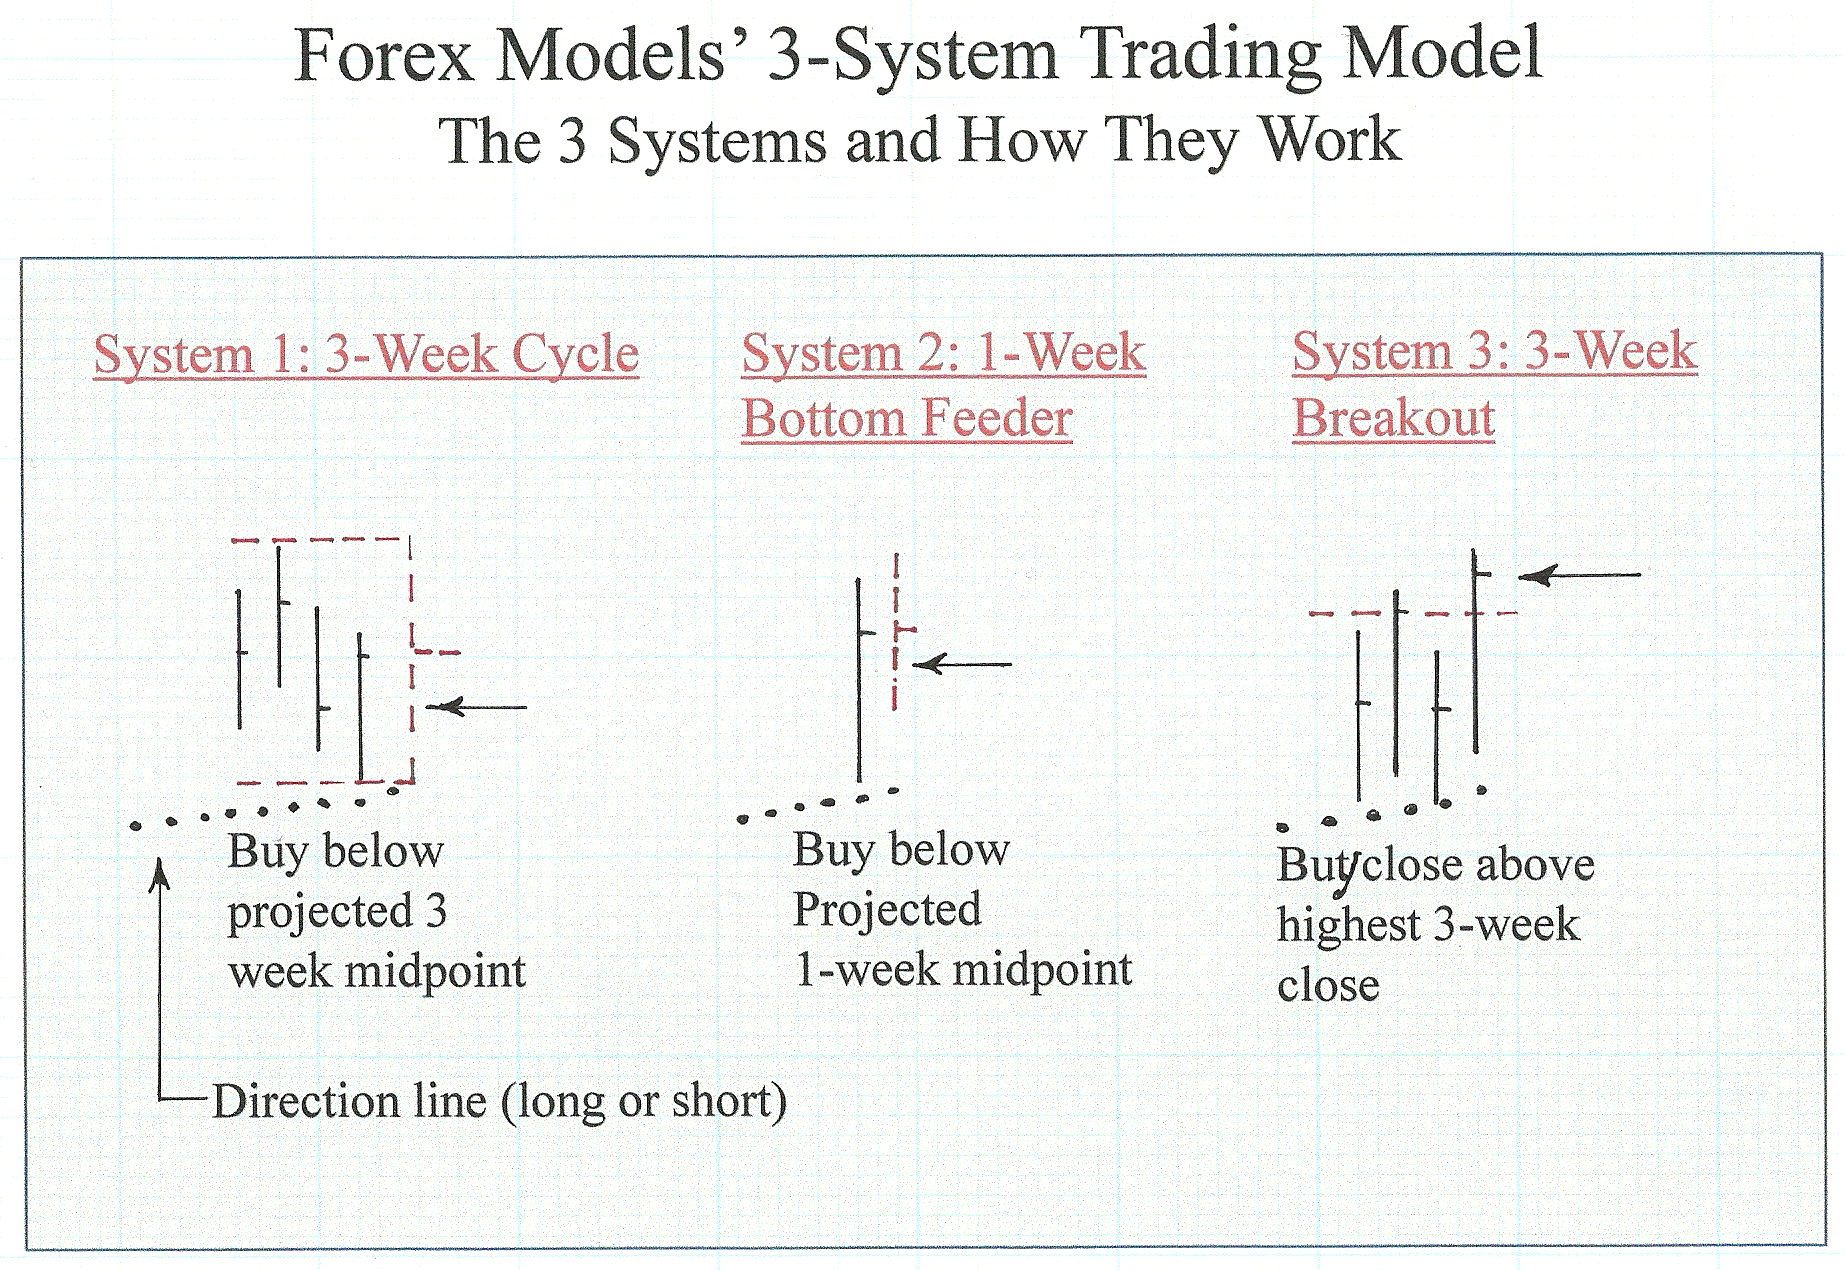 A three dimensional approach to forex trading